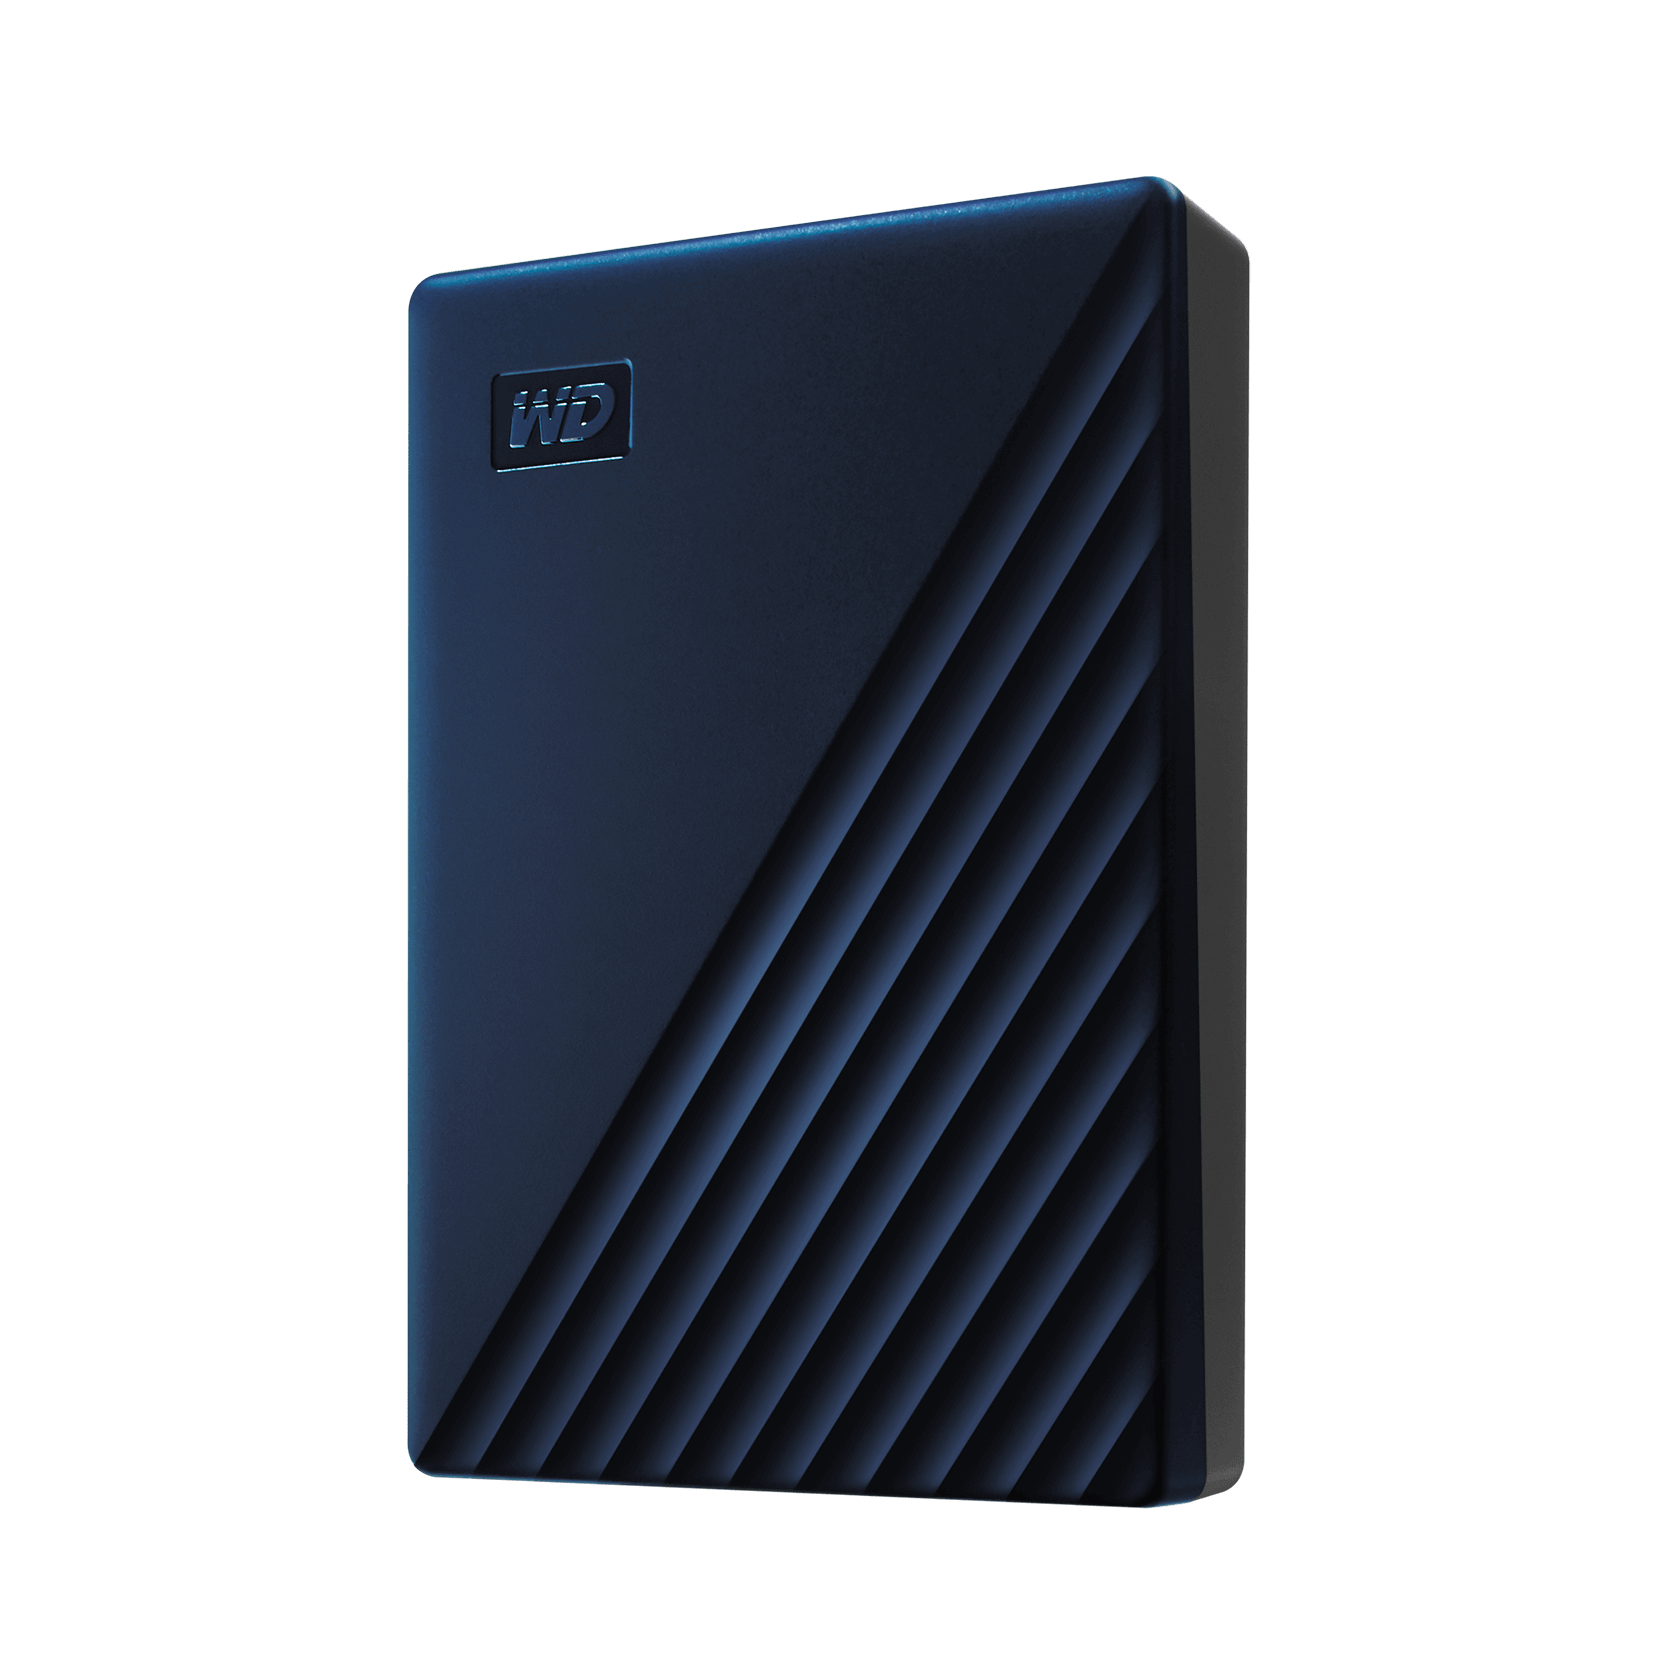 WD 4TB My Passport for Mac, Portable External Hard Drive, Blue - WDBA2F0040BBL-WESN - image 2 of 8